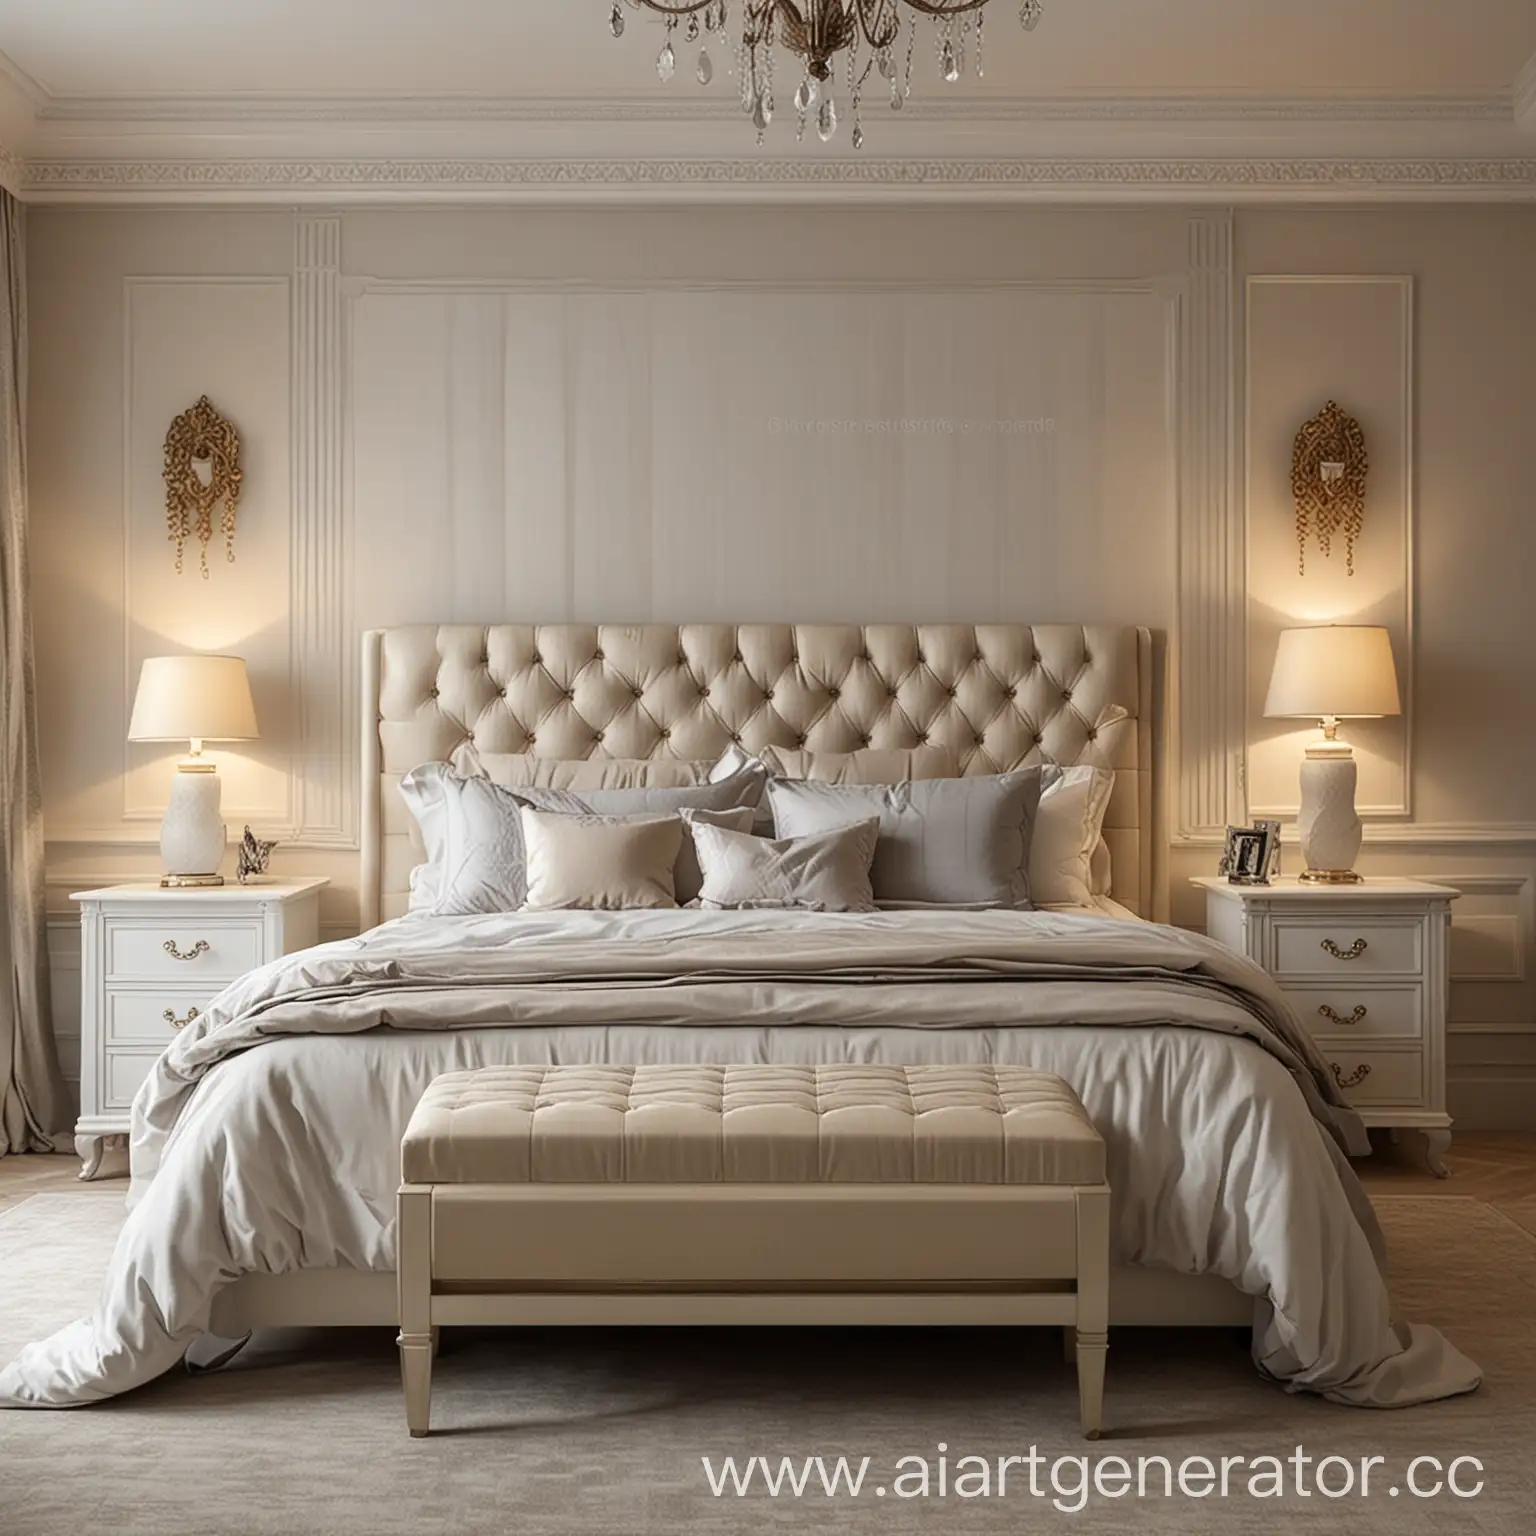 Elegant-Modern-Classical-Bedroom-Furniture-Sophisticated-Pieces-for-Timeless-Luxury